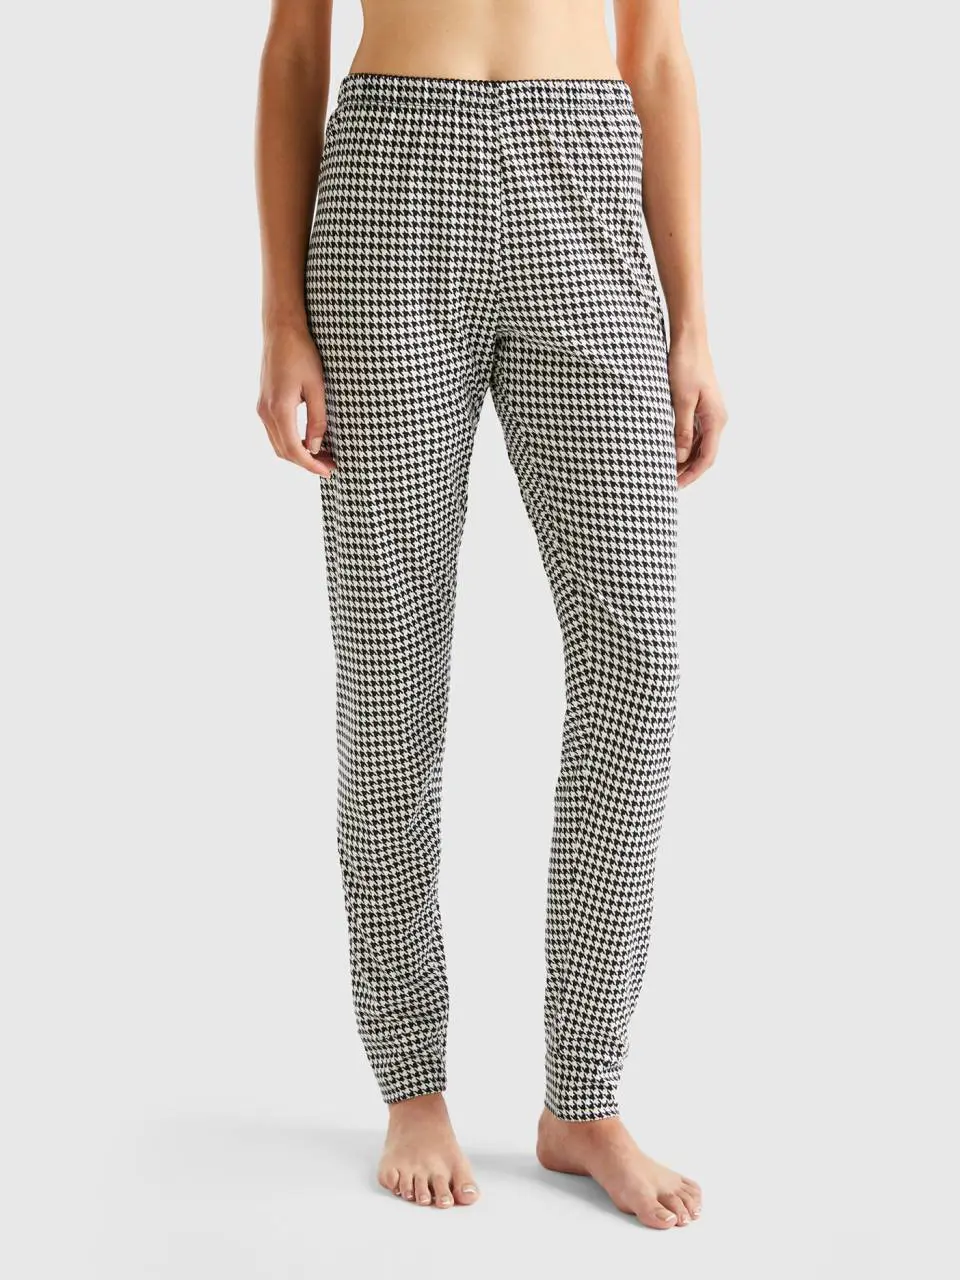 Benetton houndstooth trousers. 1